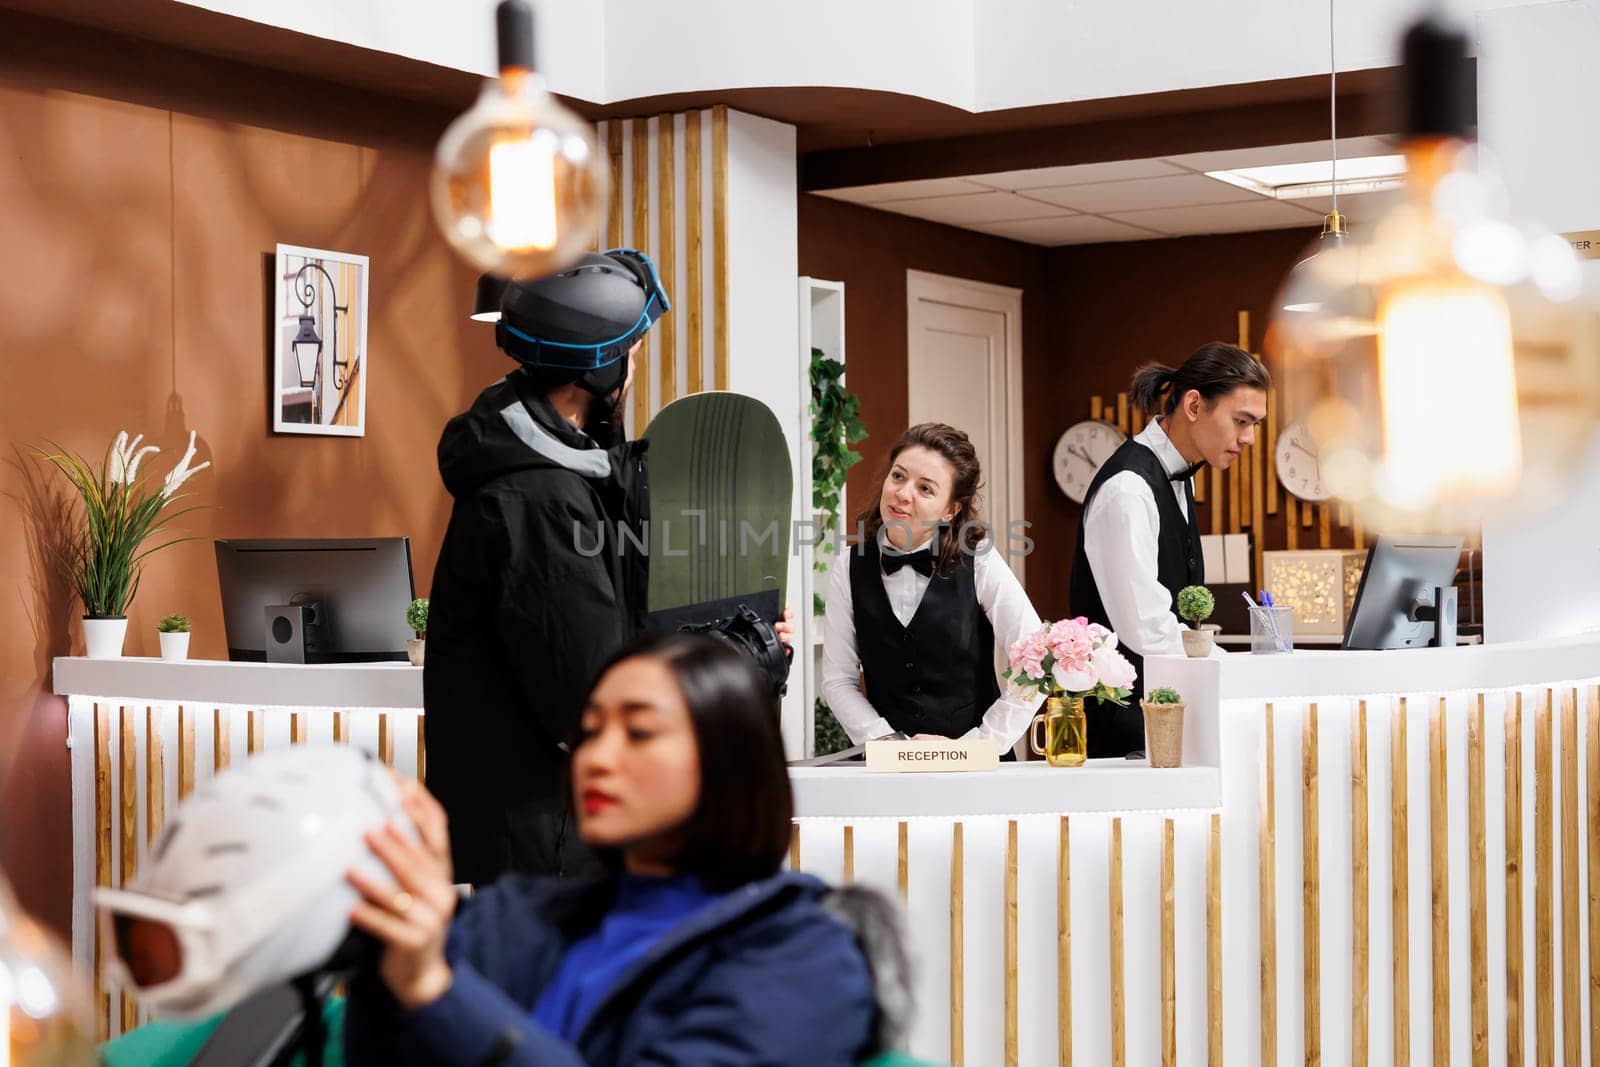 Young man wearing helmet and holding snowboard arrives at hotel reception greeted by friendly staff. Guests in snow gear going for wintersport activity at luxury ski mountain resort.